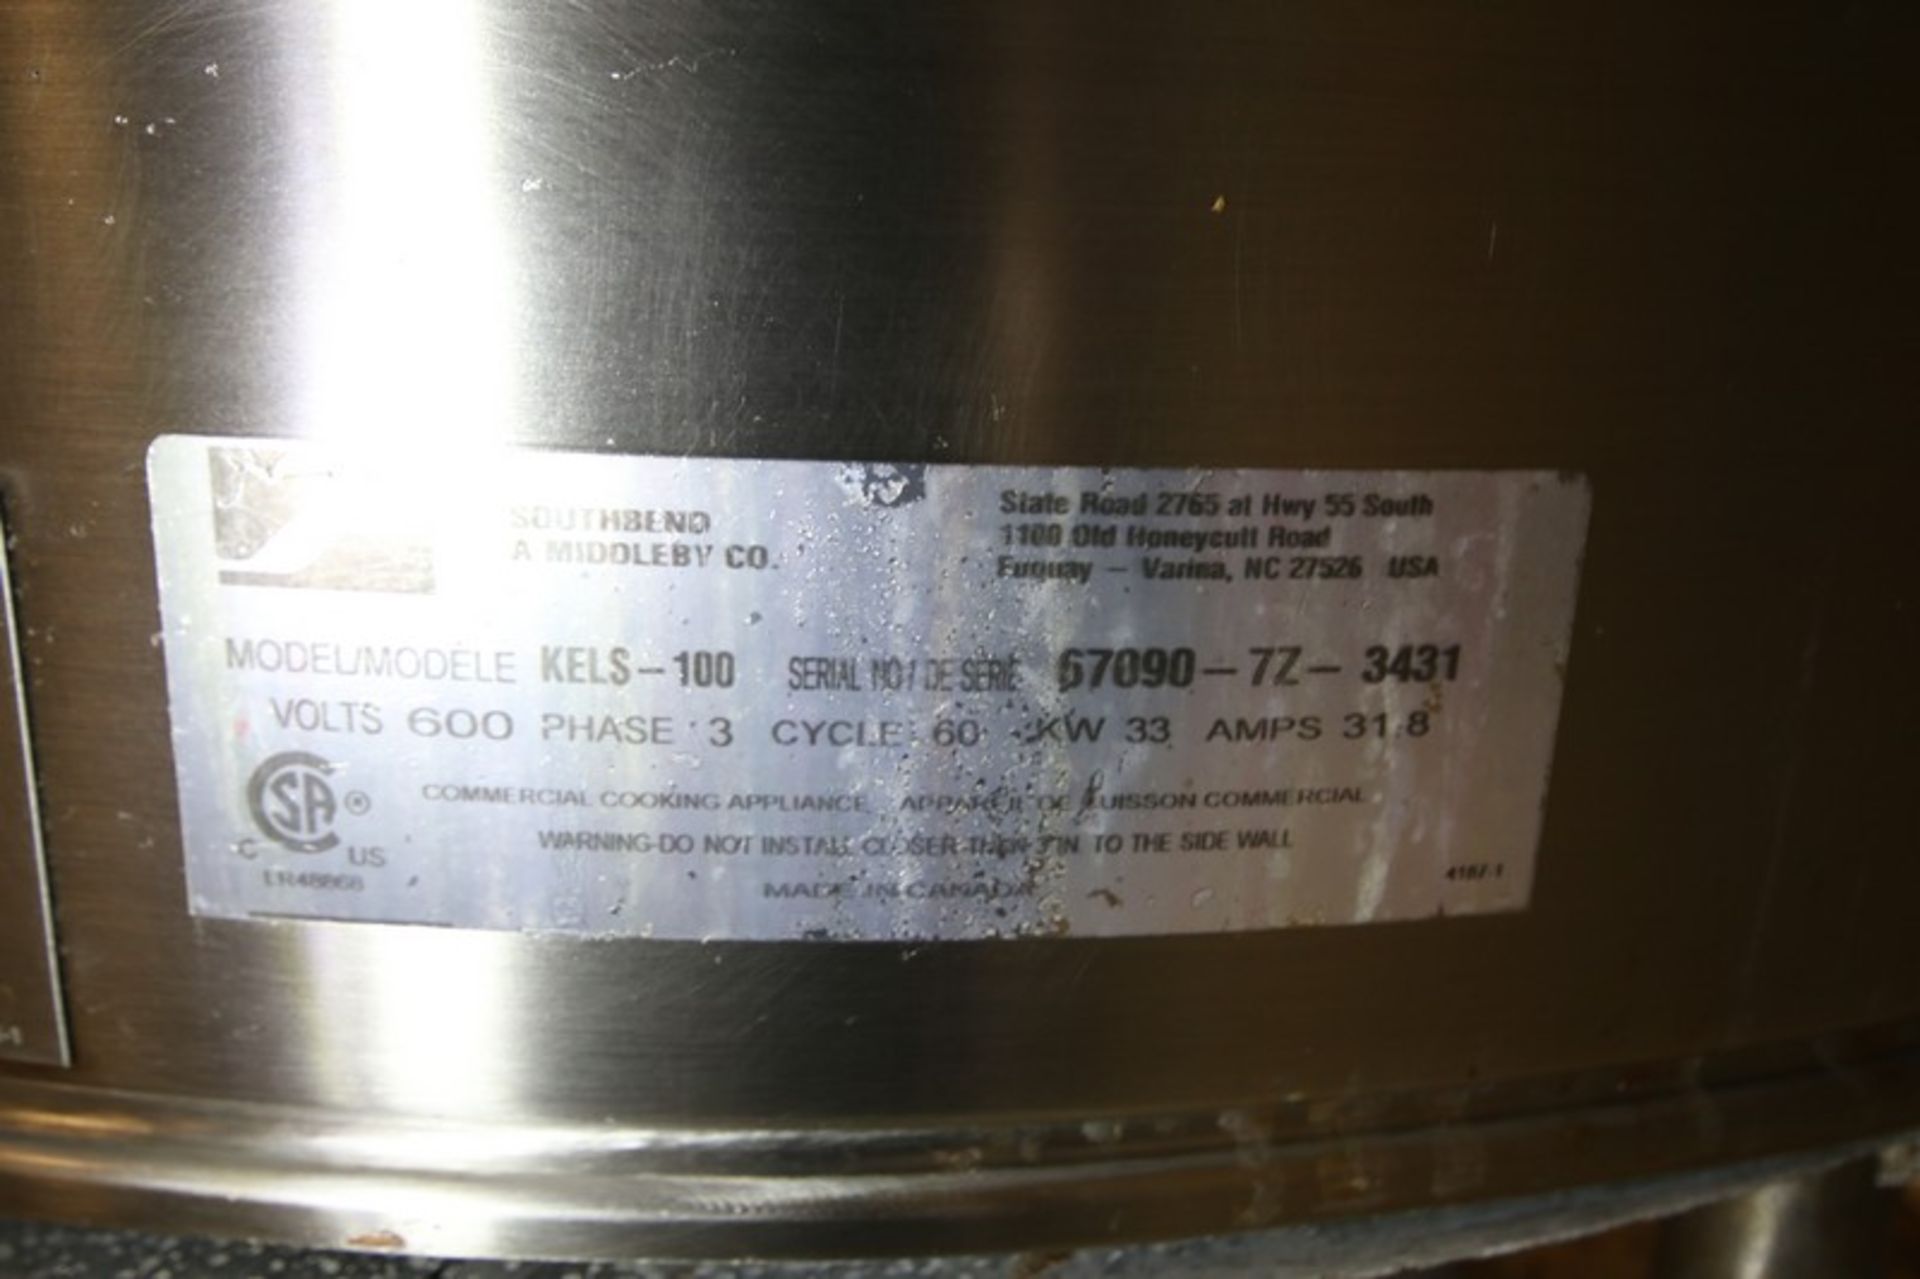 Southbend 100 Gallon S/S Jacketed Electric Kettle, Model KELS-100, SN 67090-7Z-3431 with 3" CT - Image 8 of 9